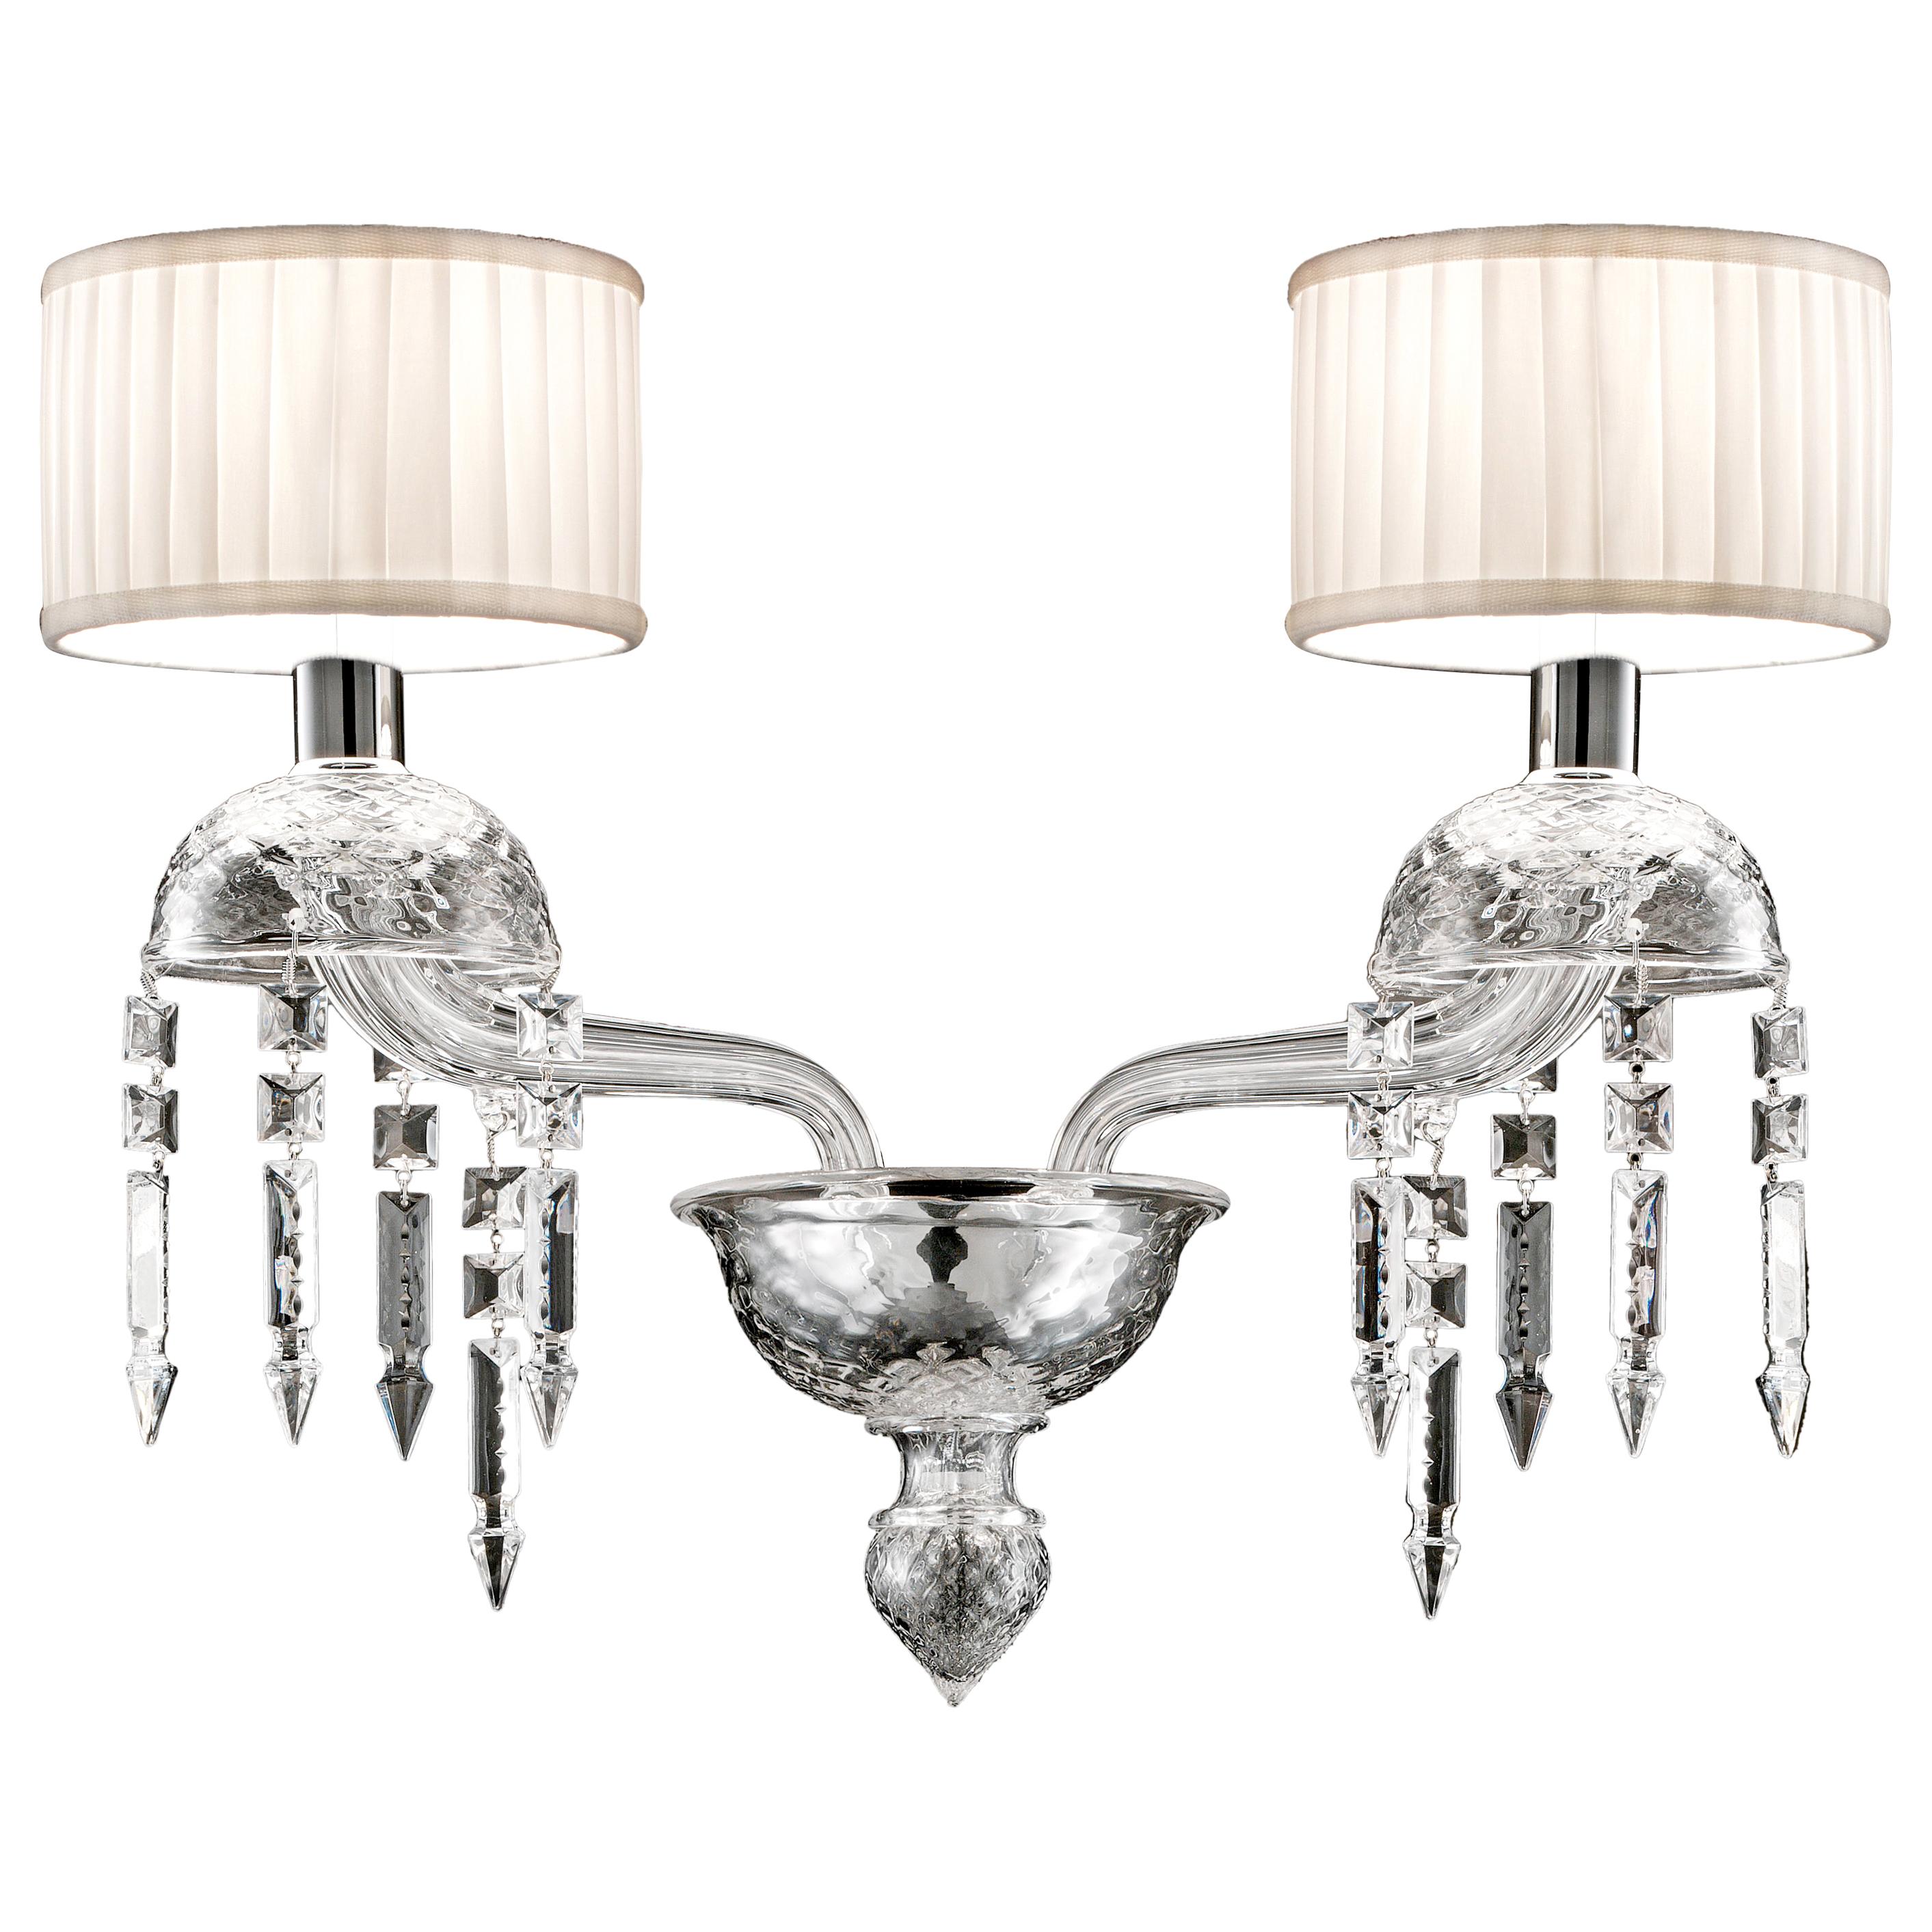 Clear (Crystal_CC) Premiere Dame 5696 02 Wall Sconce in Glass with White Shade, by Barovier & Toso